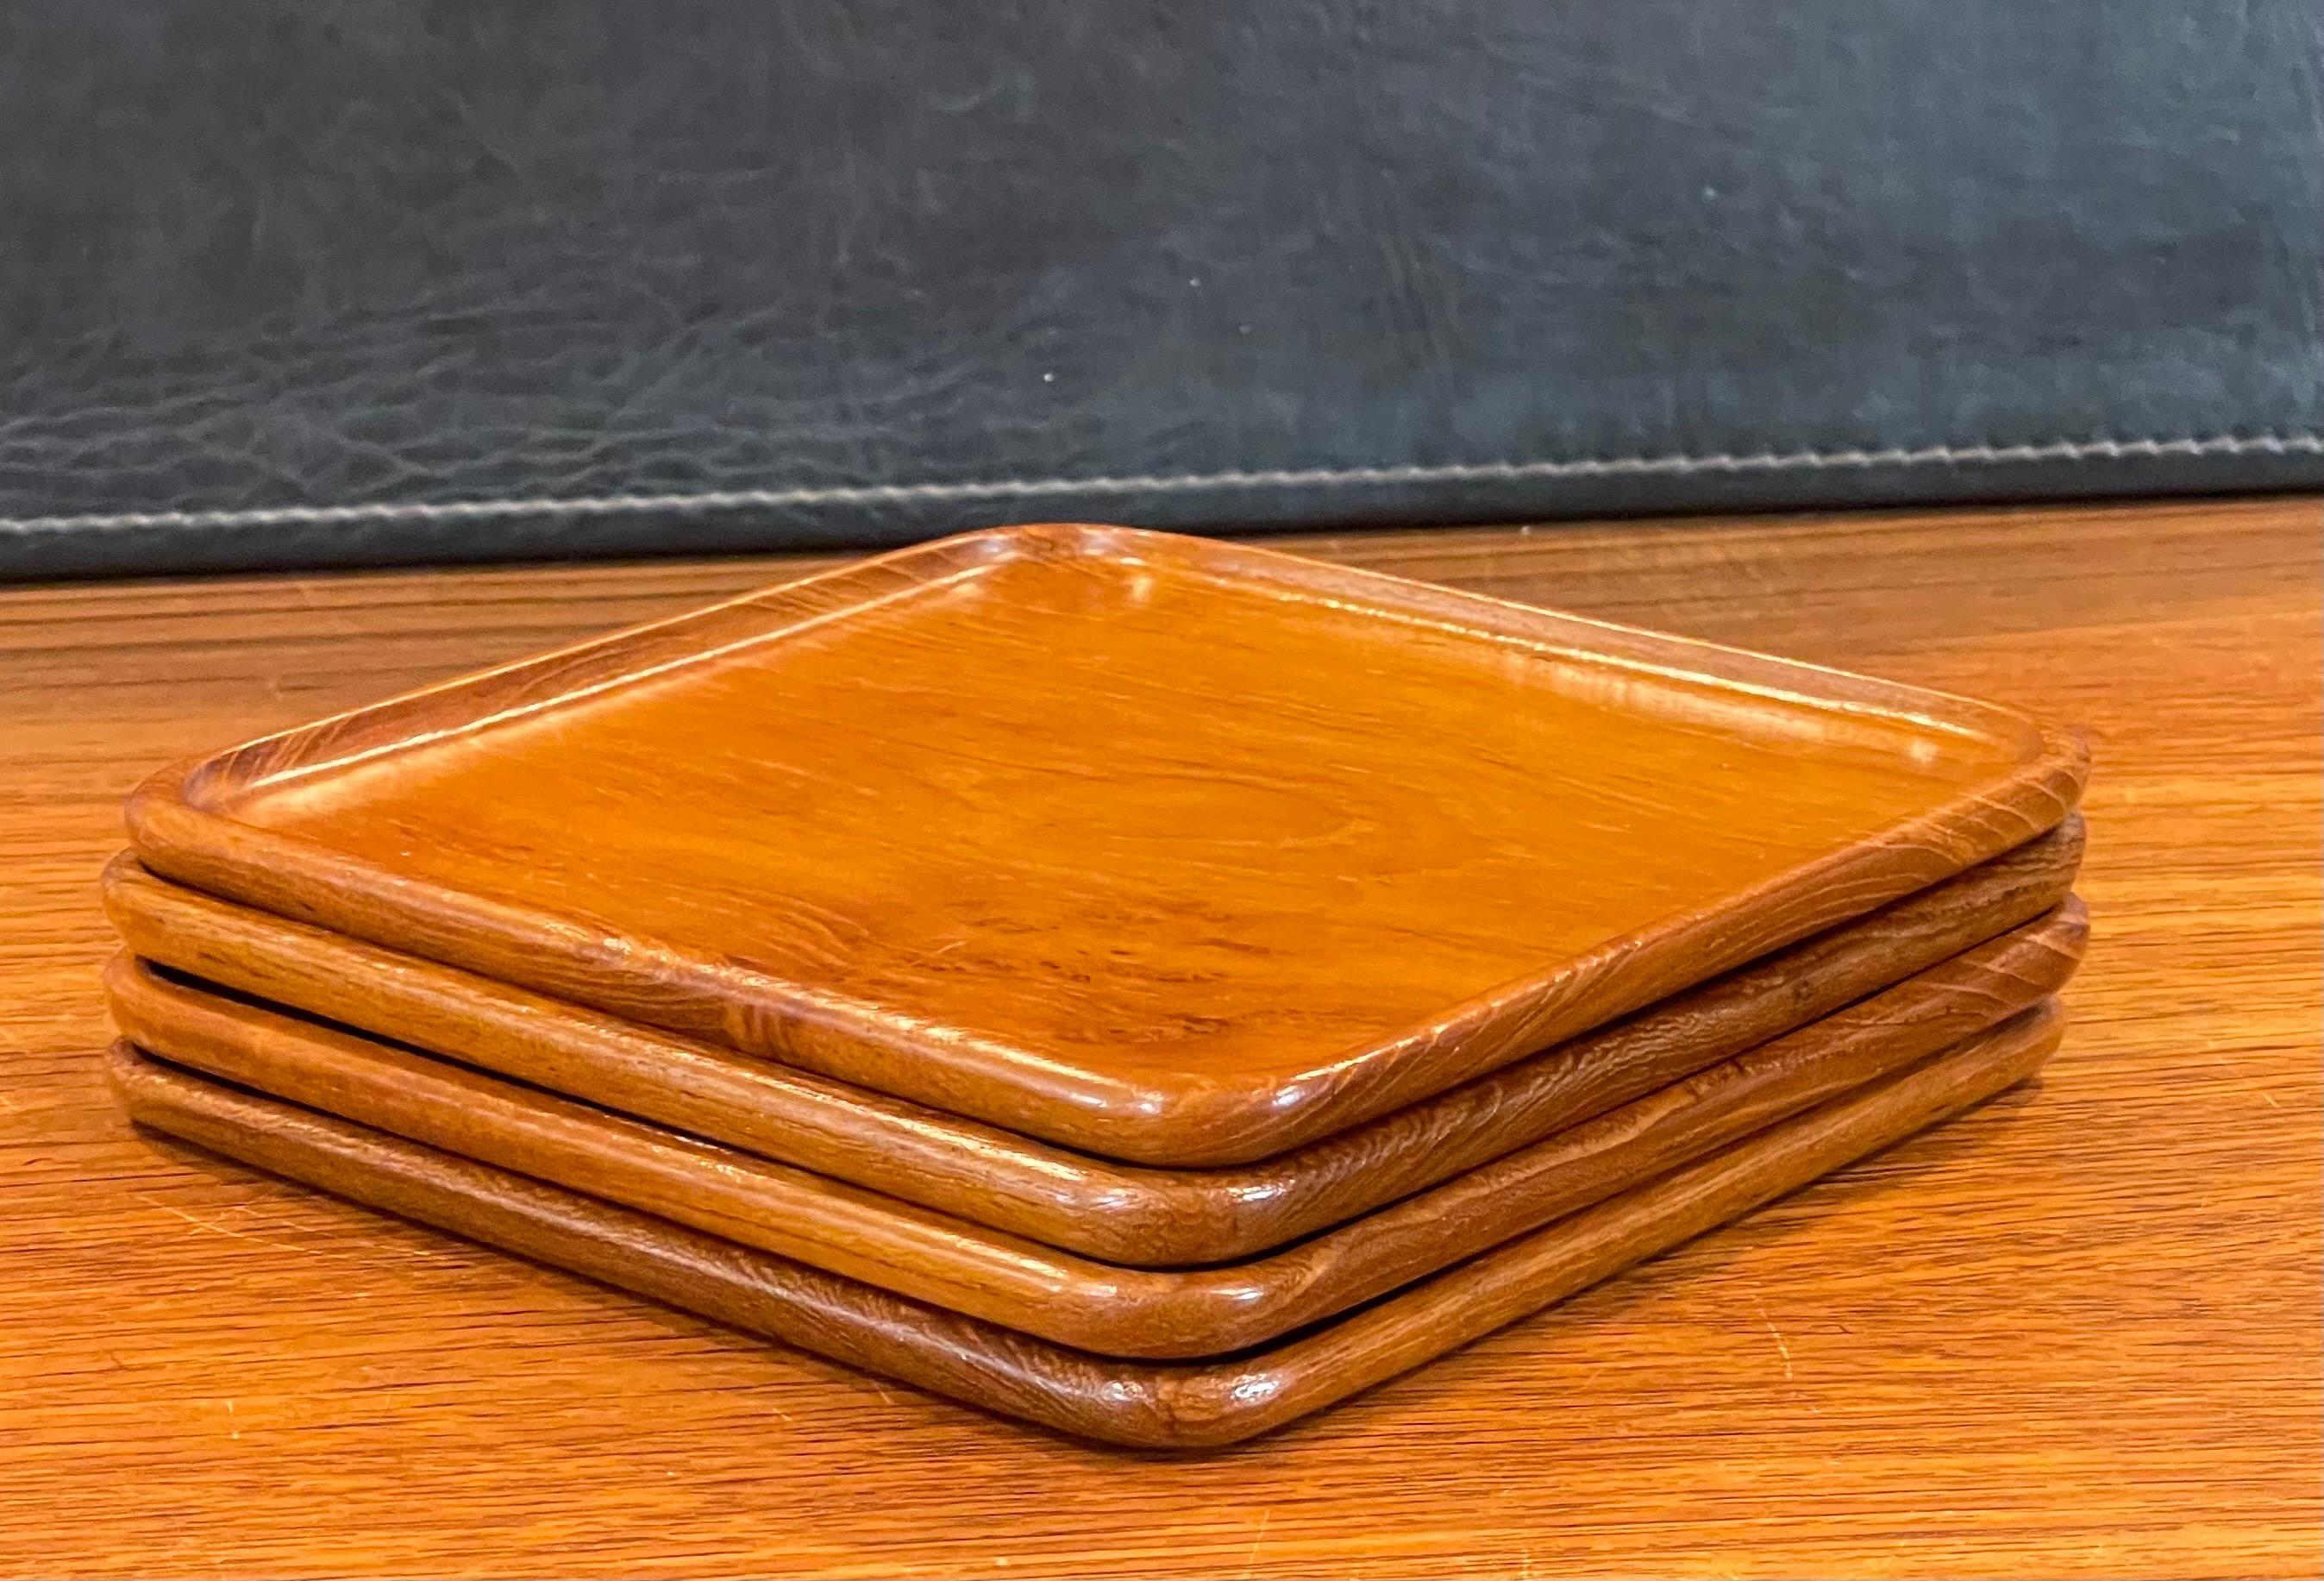 Set of Four Danish Modern Snack Trays by Upsala Slojd In Good Condition For Sale In San Diego, CA